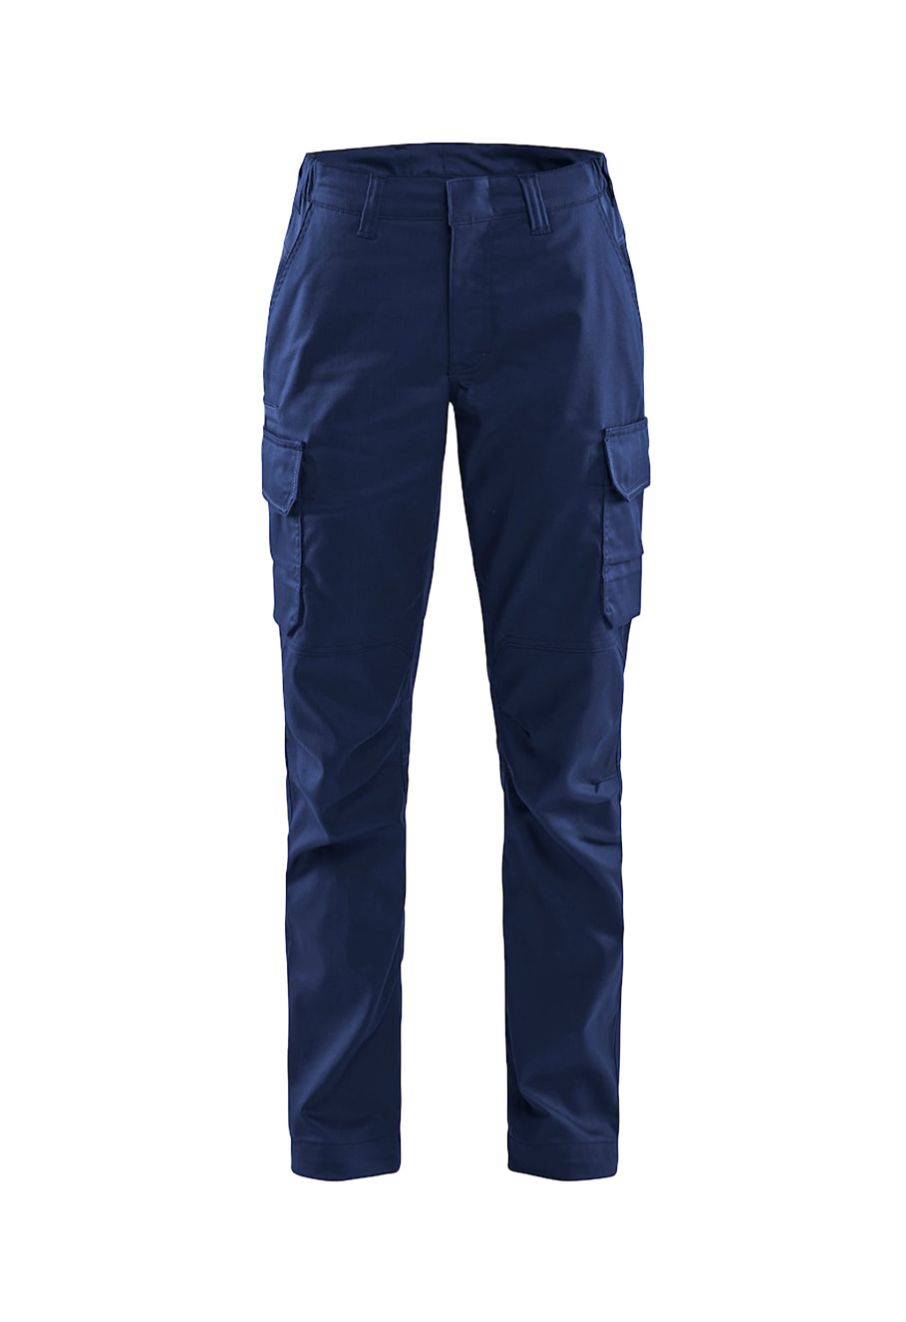 Womens Hi Vis Taped Cotton Cargo Trousers LW8333 - Supa (Super) Safety Shop